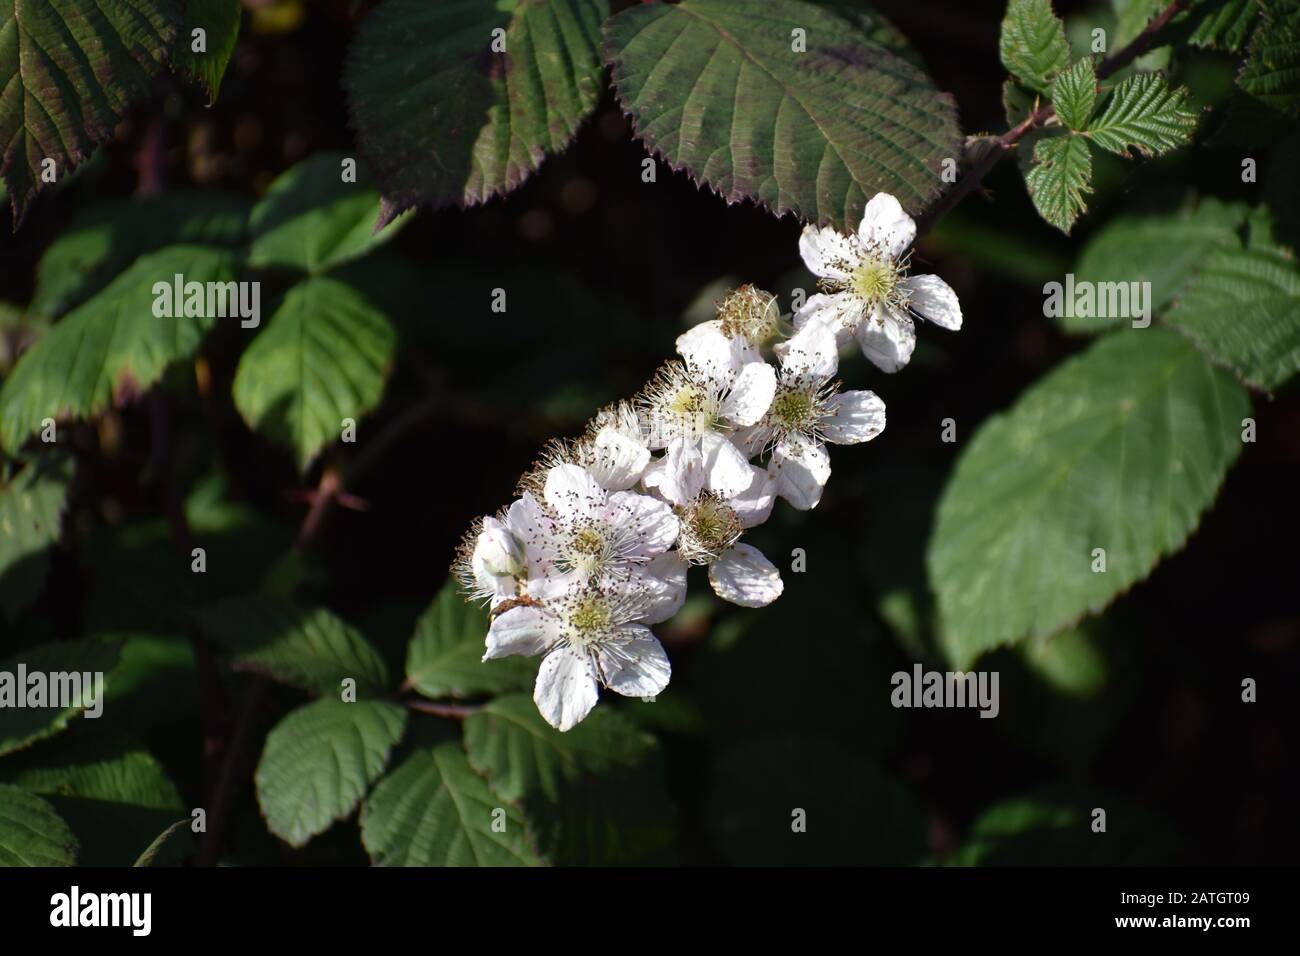 The white flowers of a wild Himalaya blackberry plant (Rubus armeniacus) in bloom along the banks of Struve Slough in Watsonville, California. Stock Photo